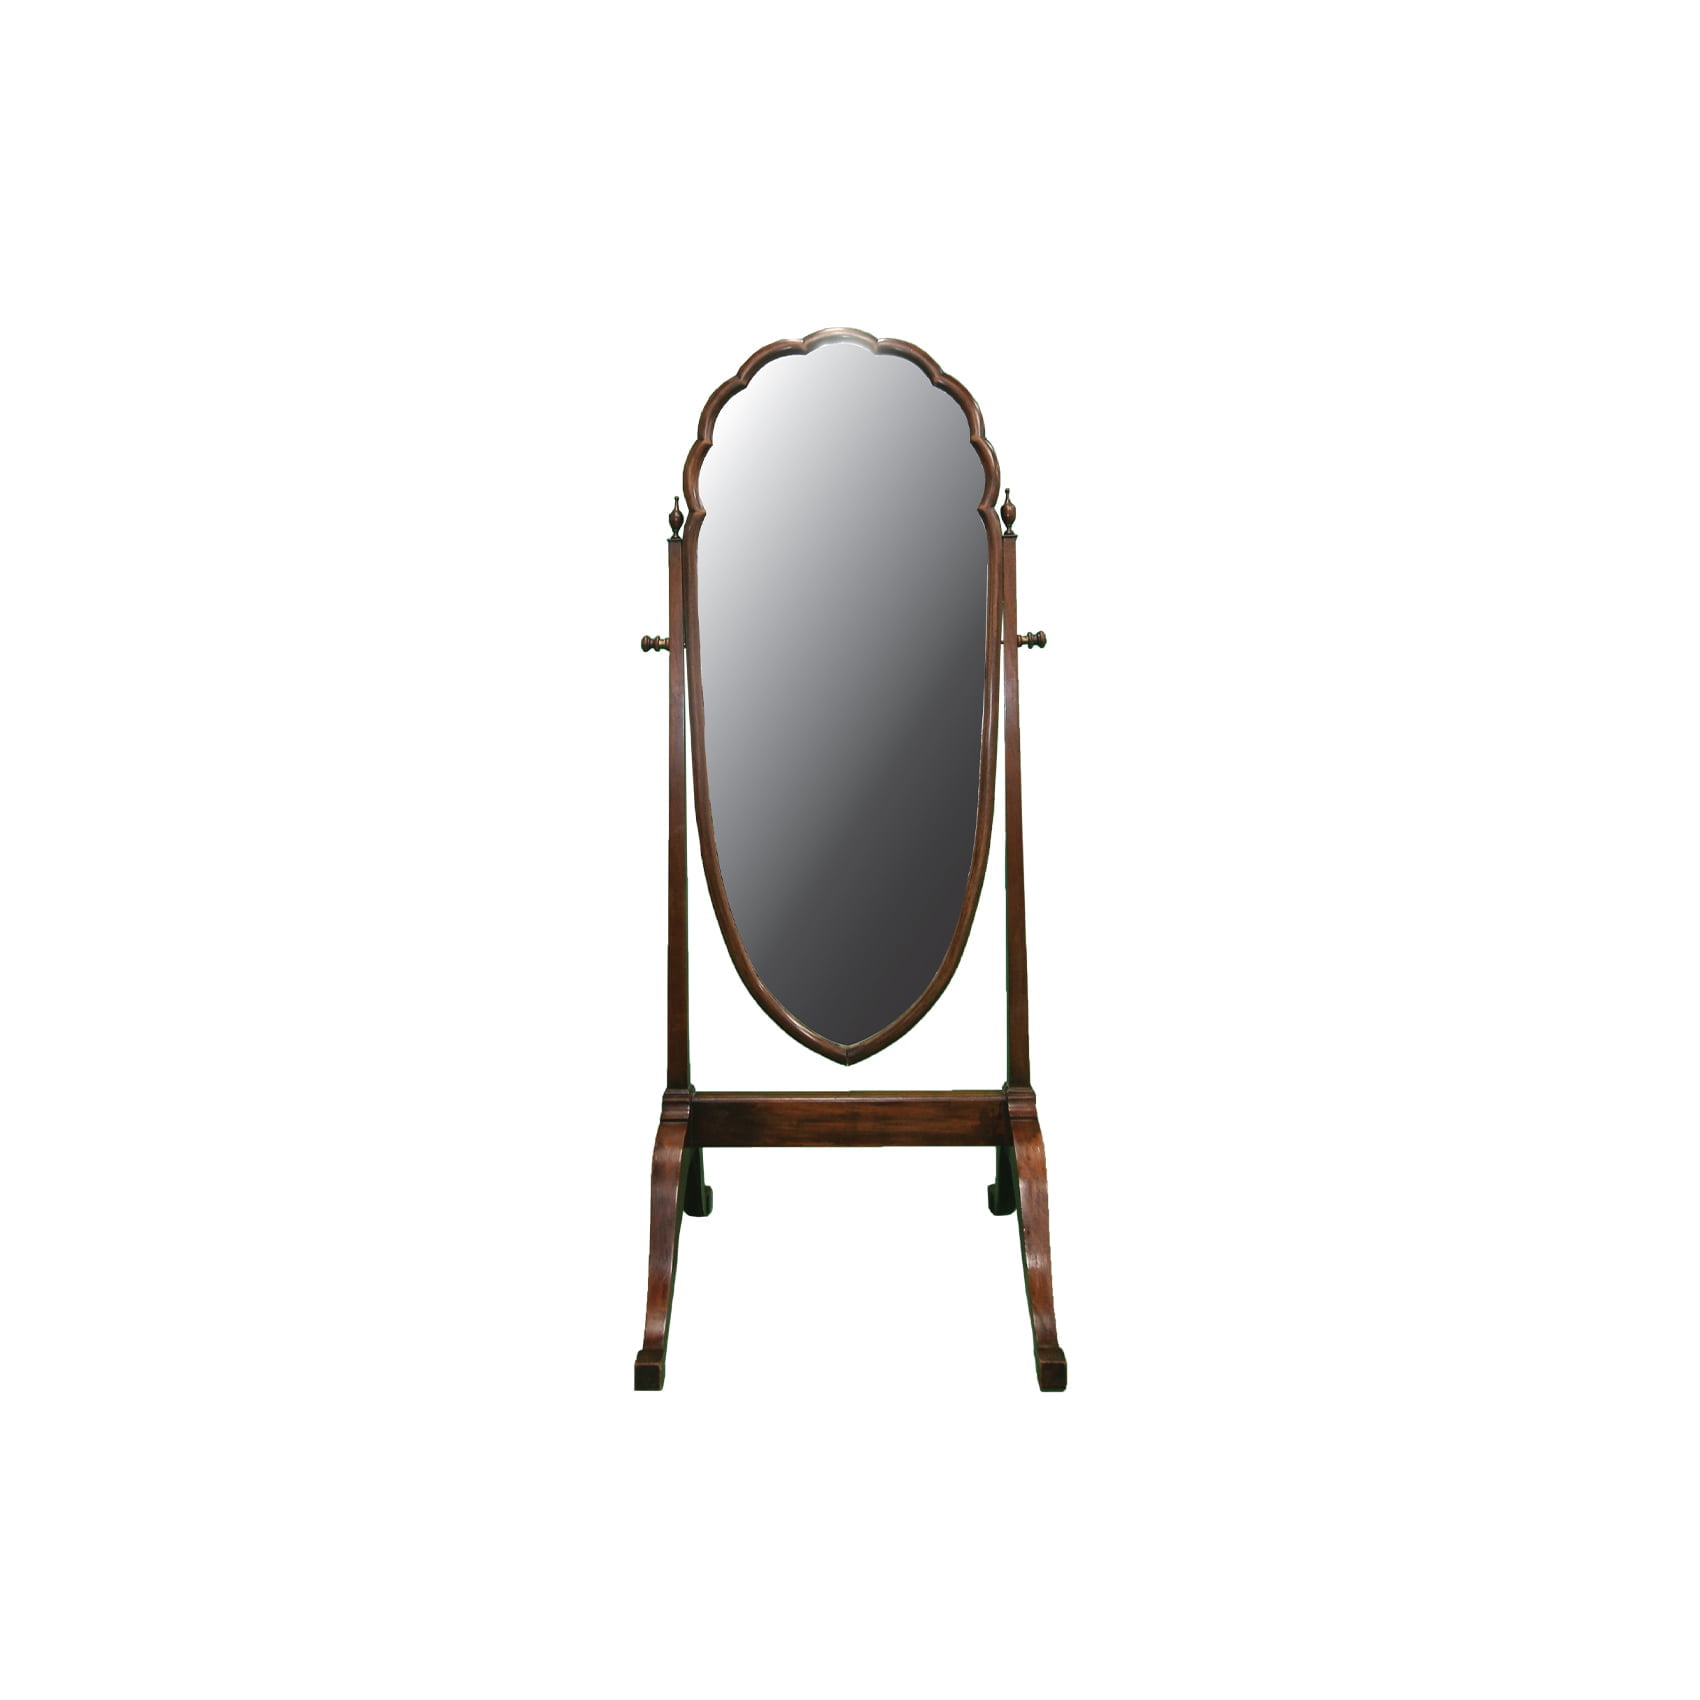 Cheval standing mirror